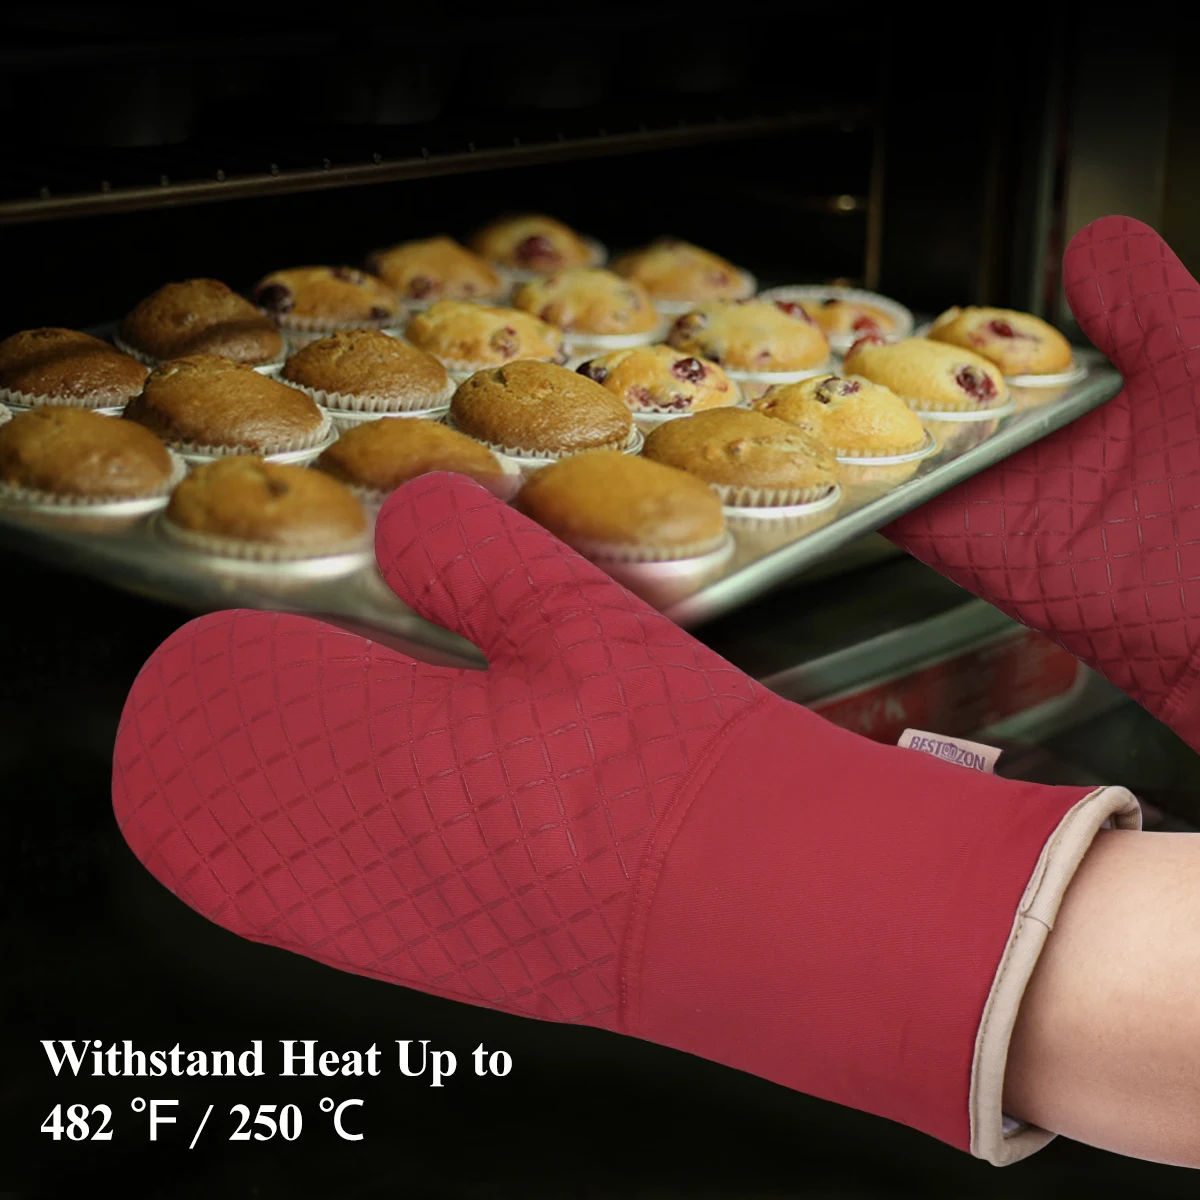 https://ae01.alicdn.com/kf/He3a8a9c582824a4d86a71b3e5ab77ec55/Set-Of-Oven-Mitt-And-Heat-Resistant-Pot-Holder-Pad-Protective-Oven-Gloves-The-Goods-For.jpg